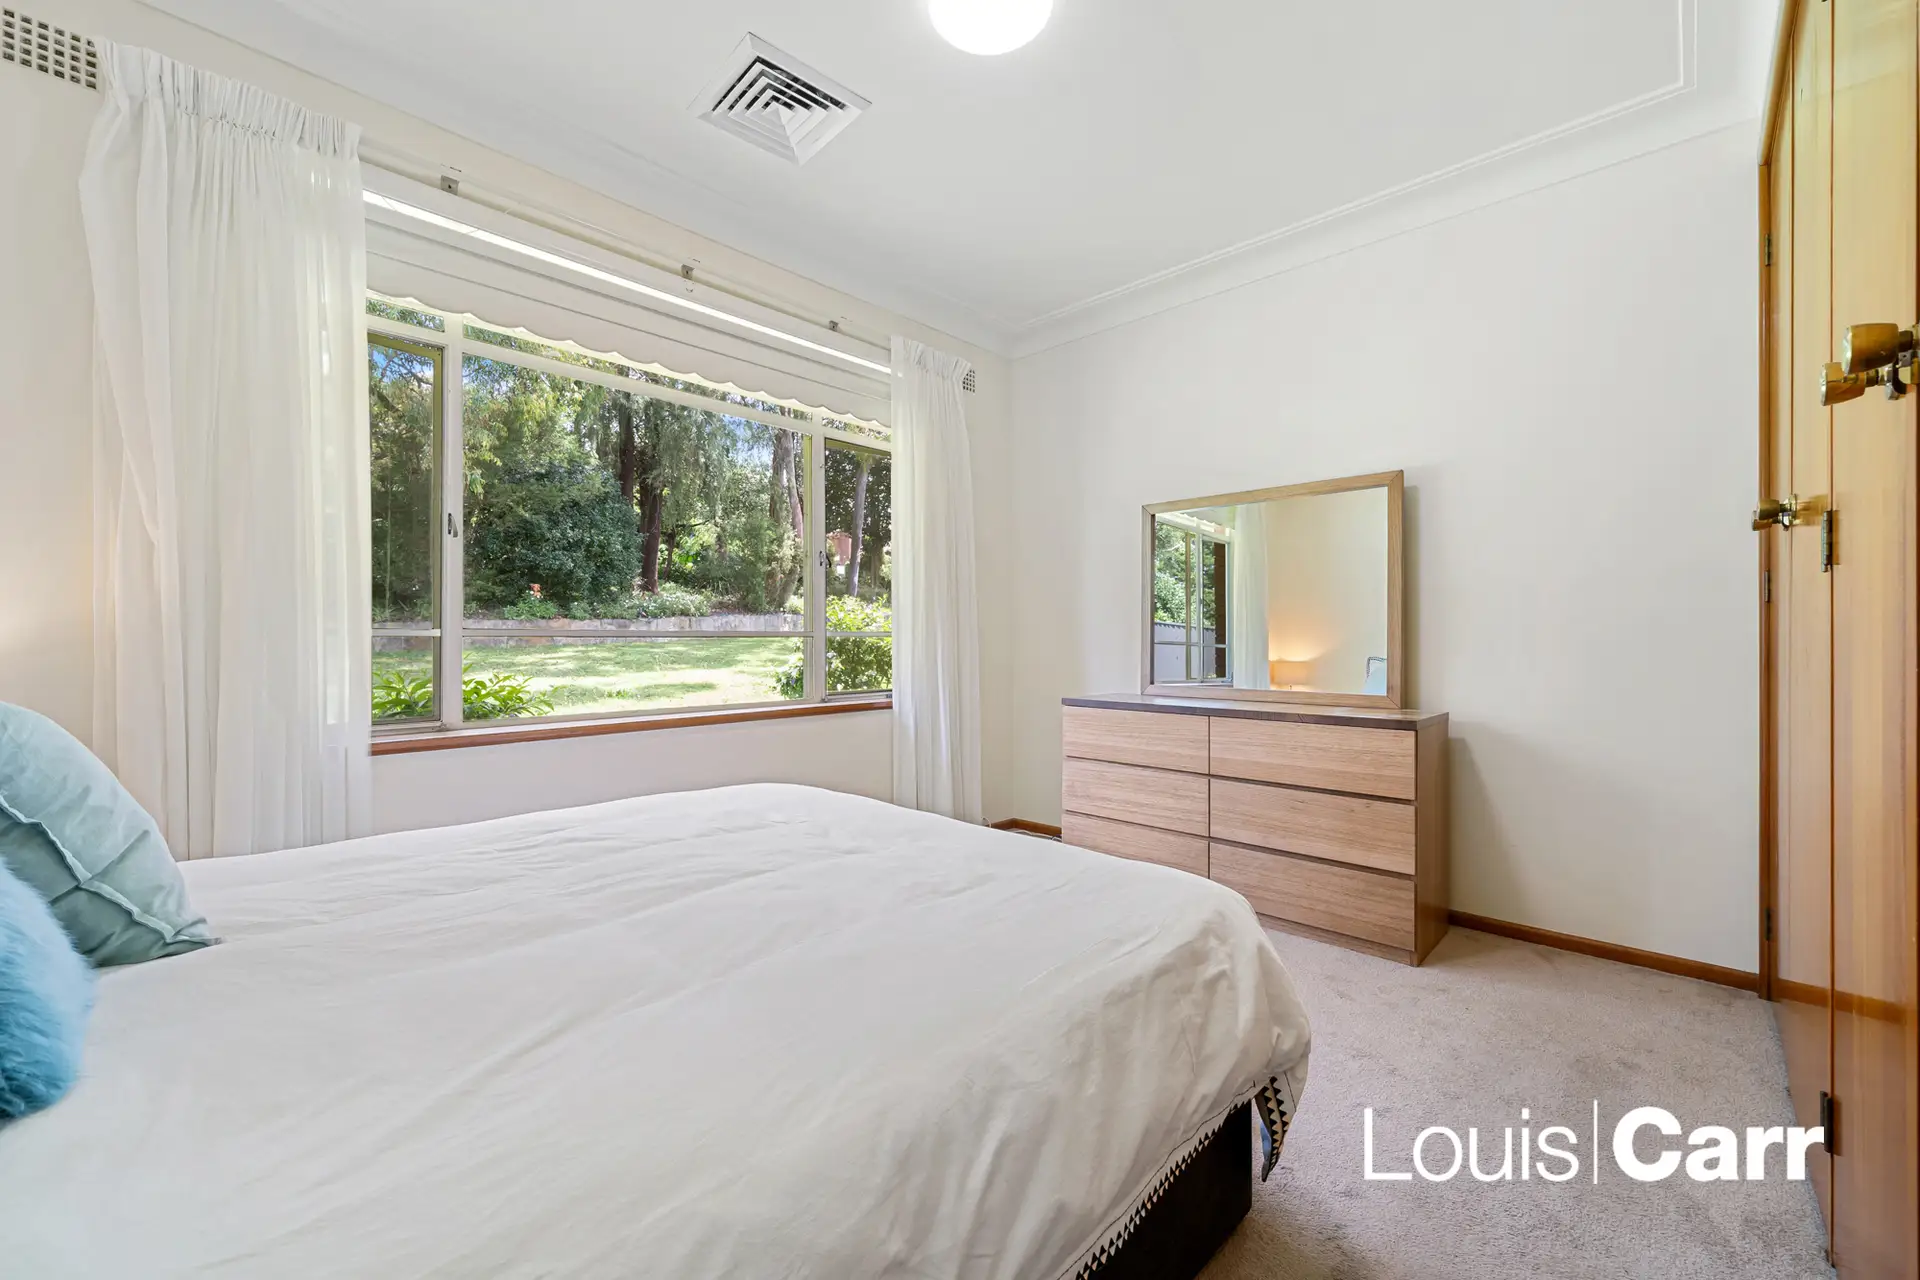 Photo #12: 18-20 Blacks Road, West Pennant Hills - Sold by Louis Carr Real Estate